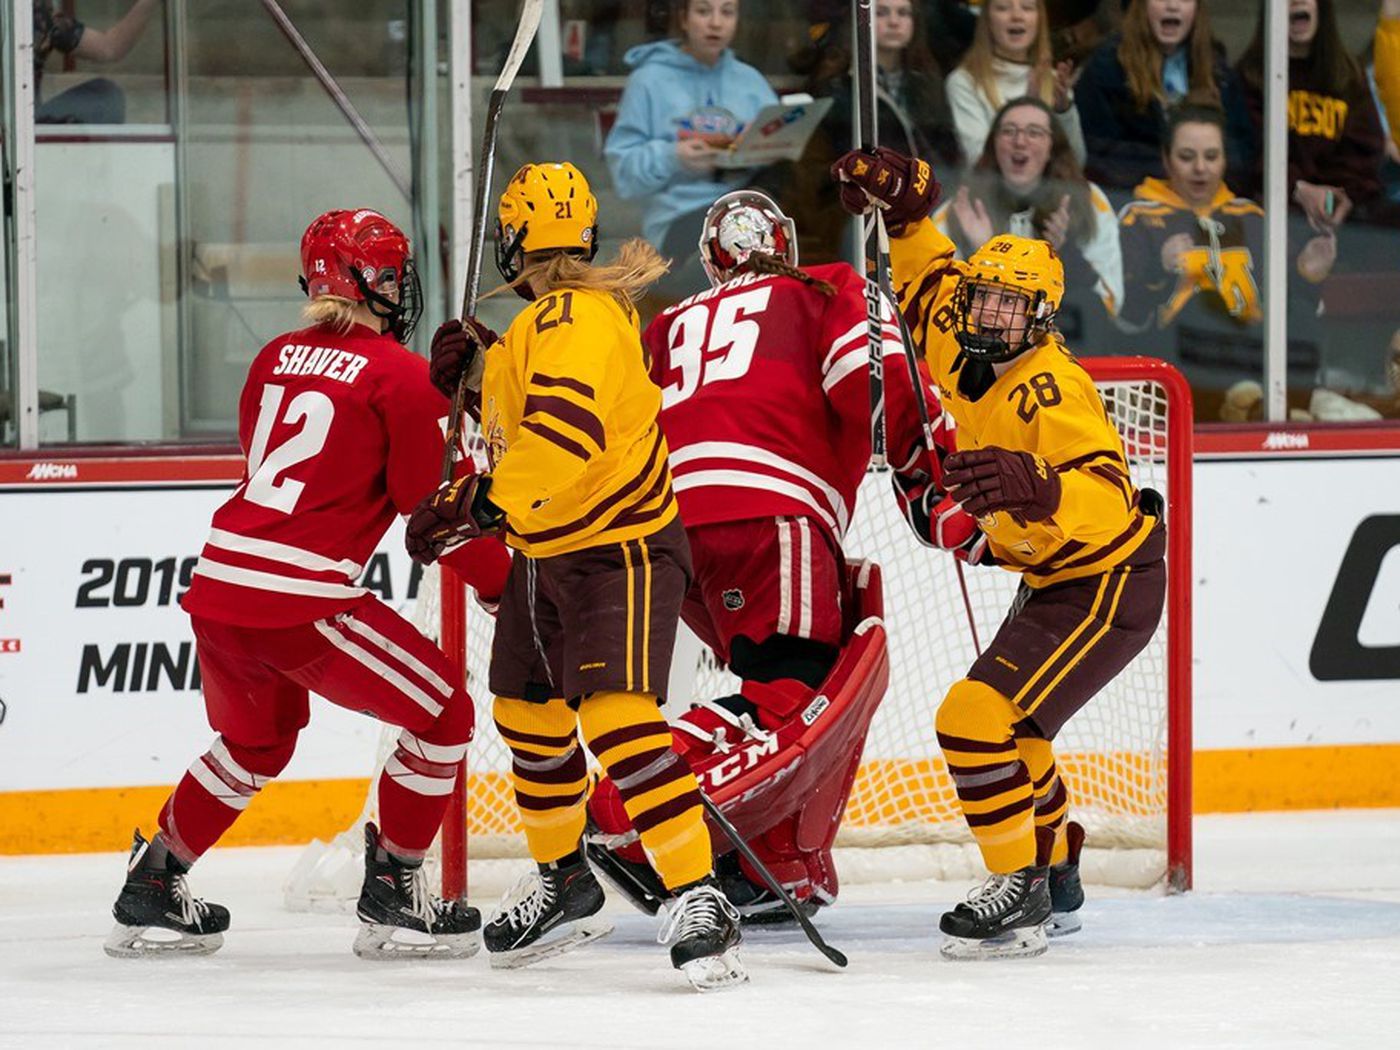 Gophers Vs Badgers In The Ncaa Women S Hockey Championship Game